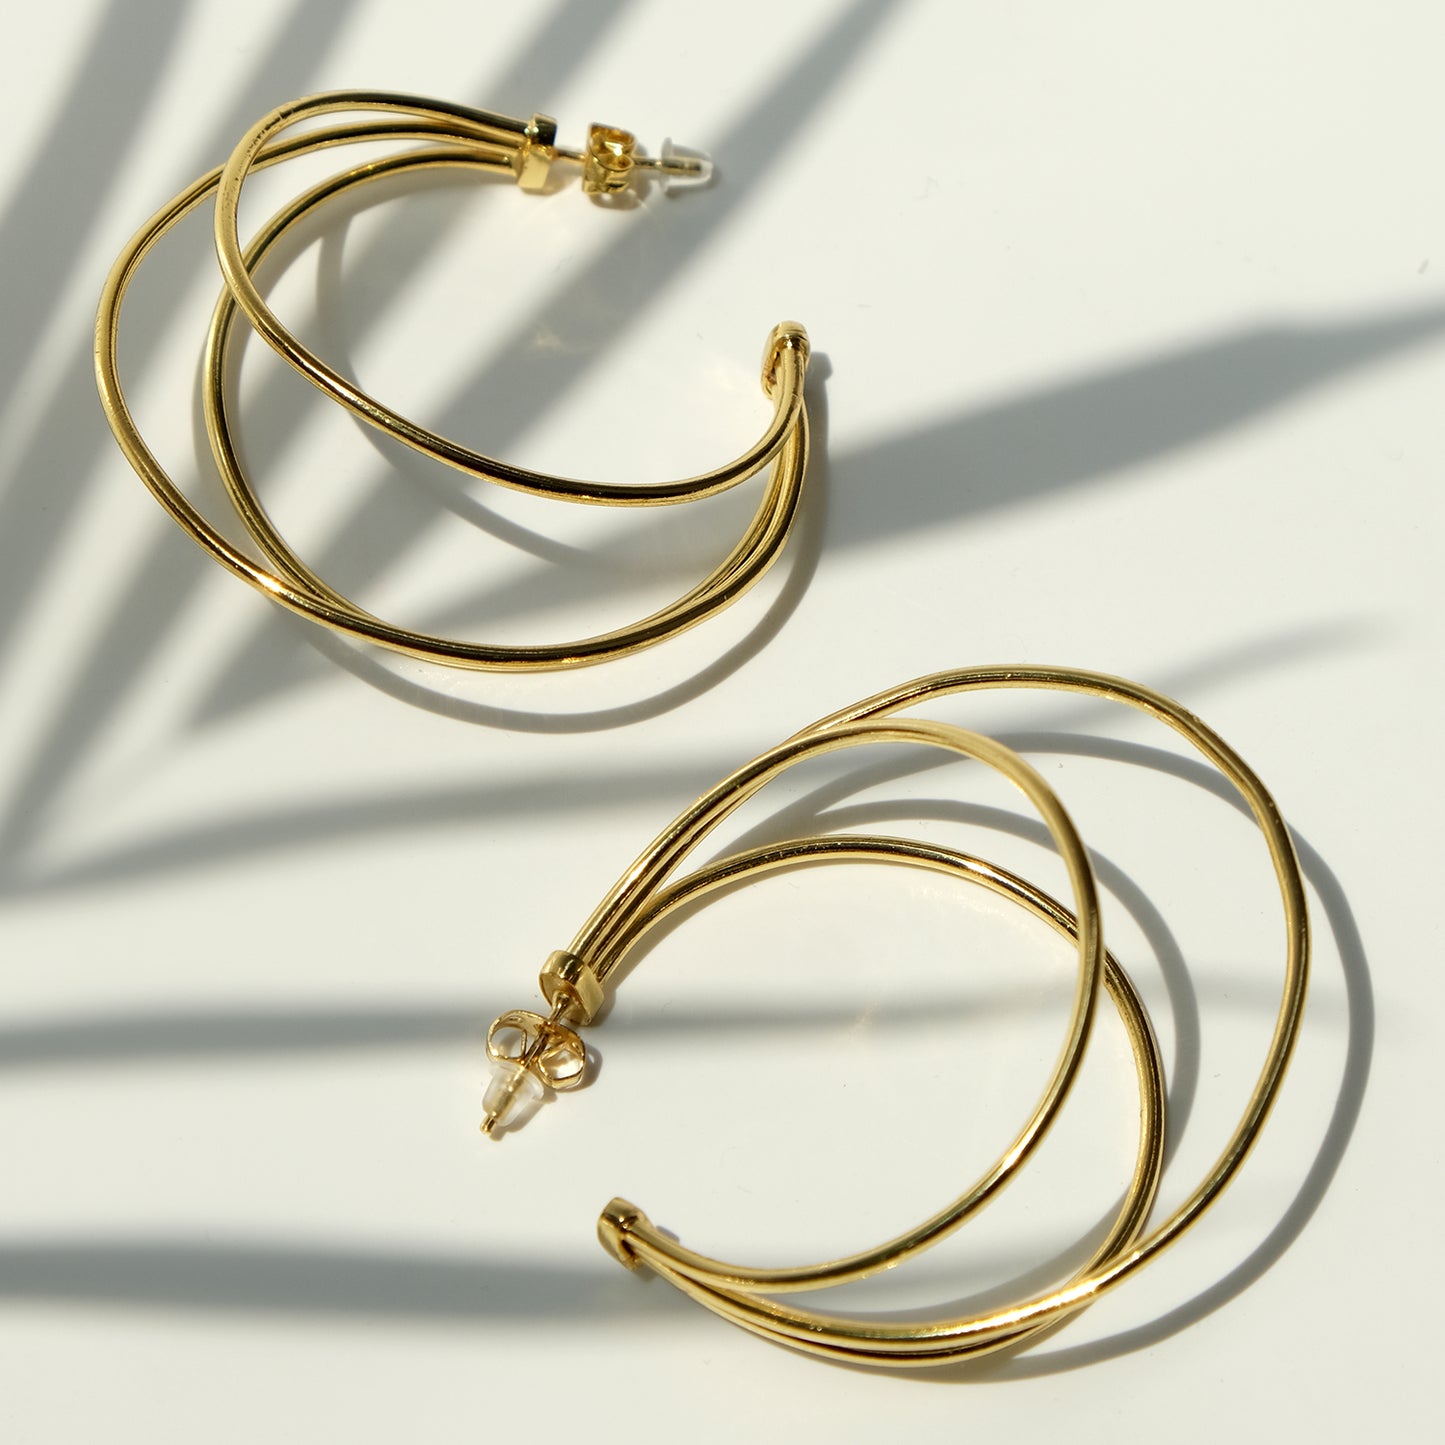 Trilogy Layered Hoops